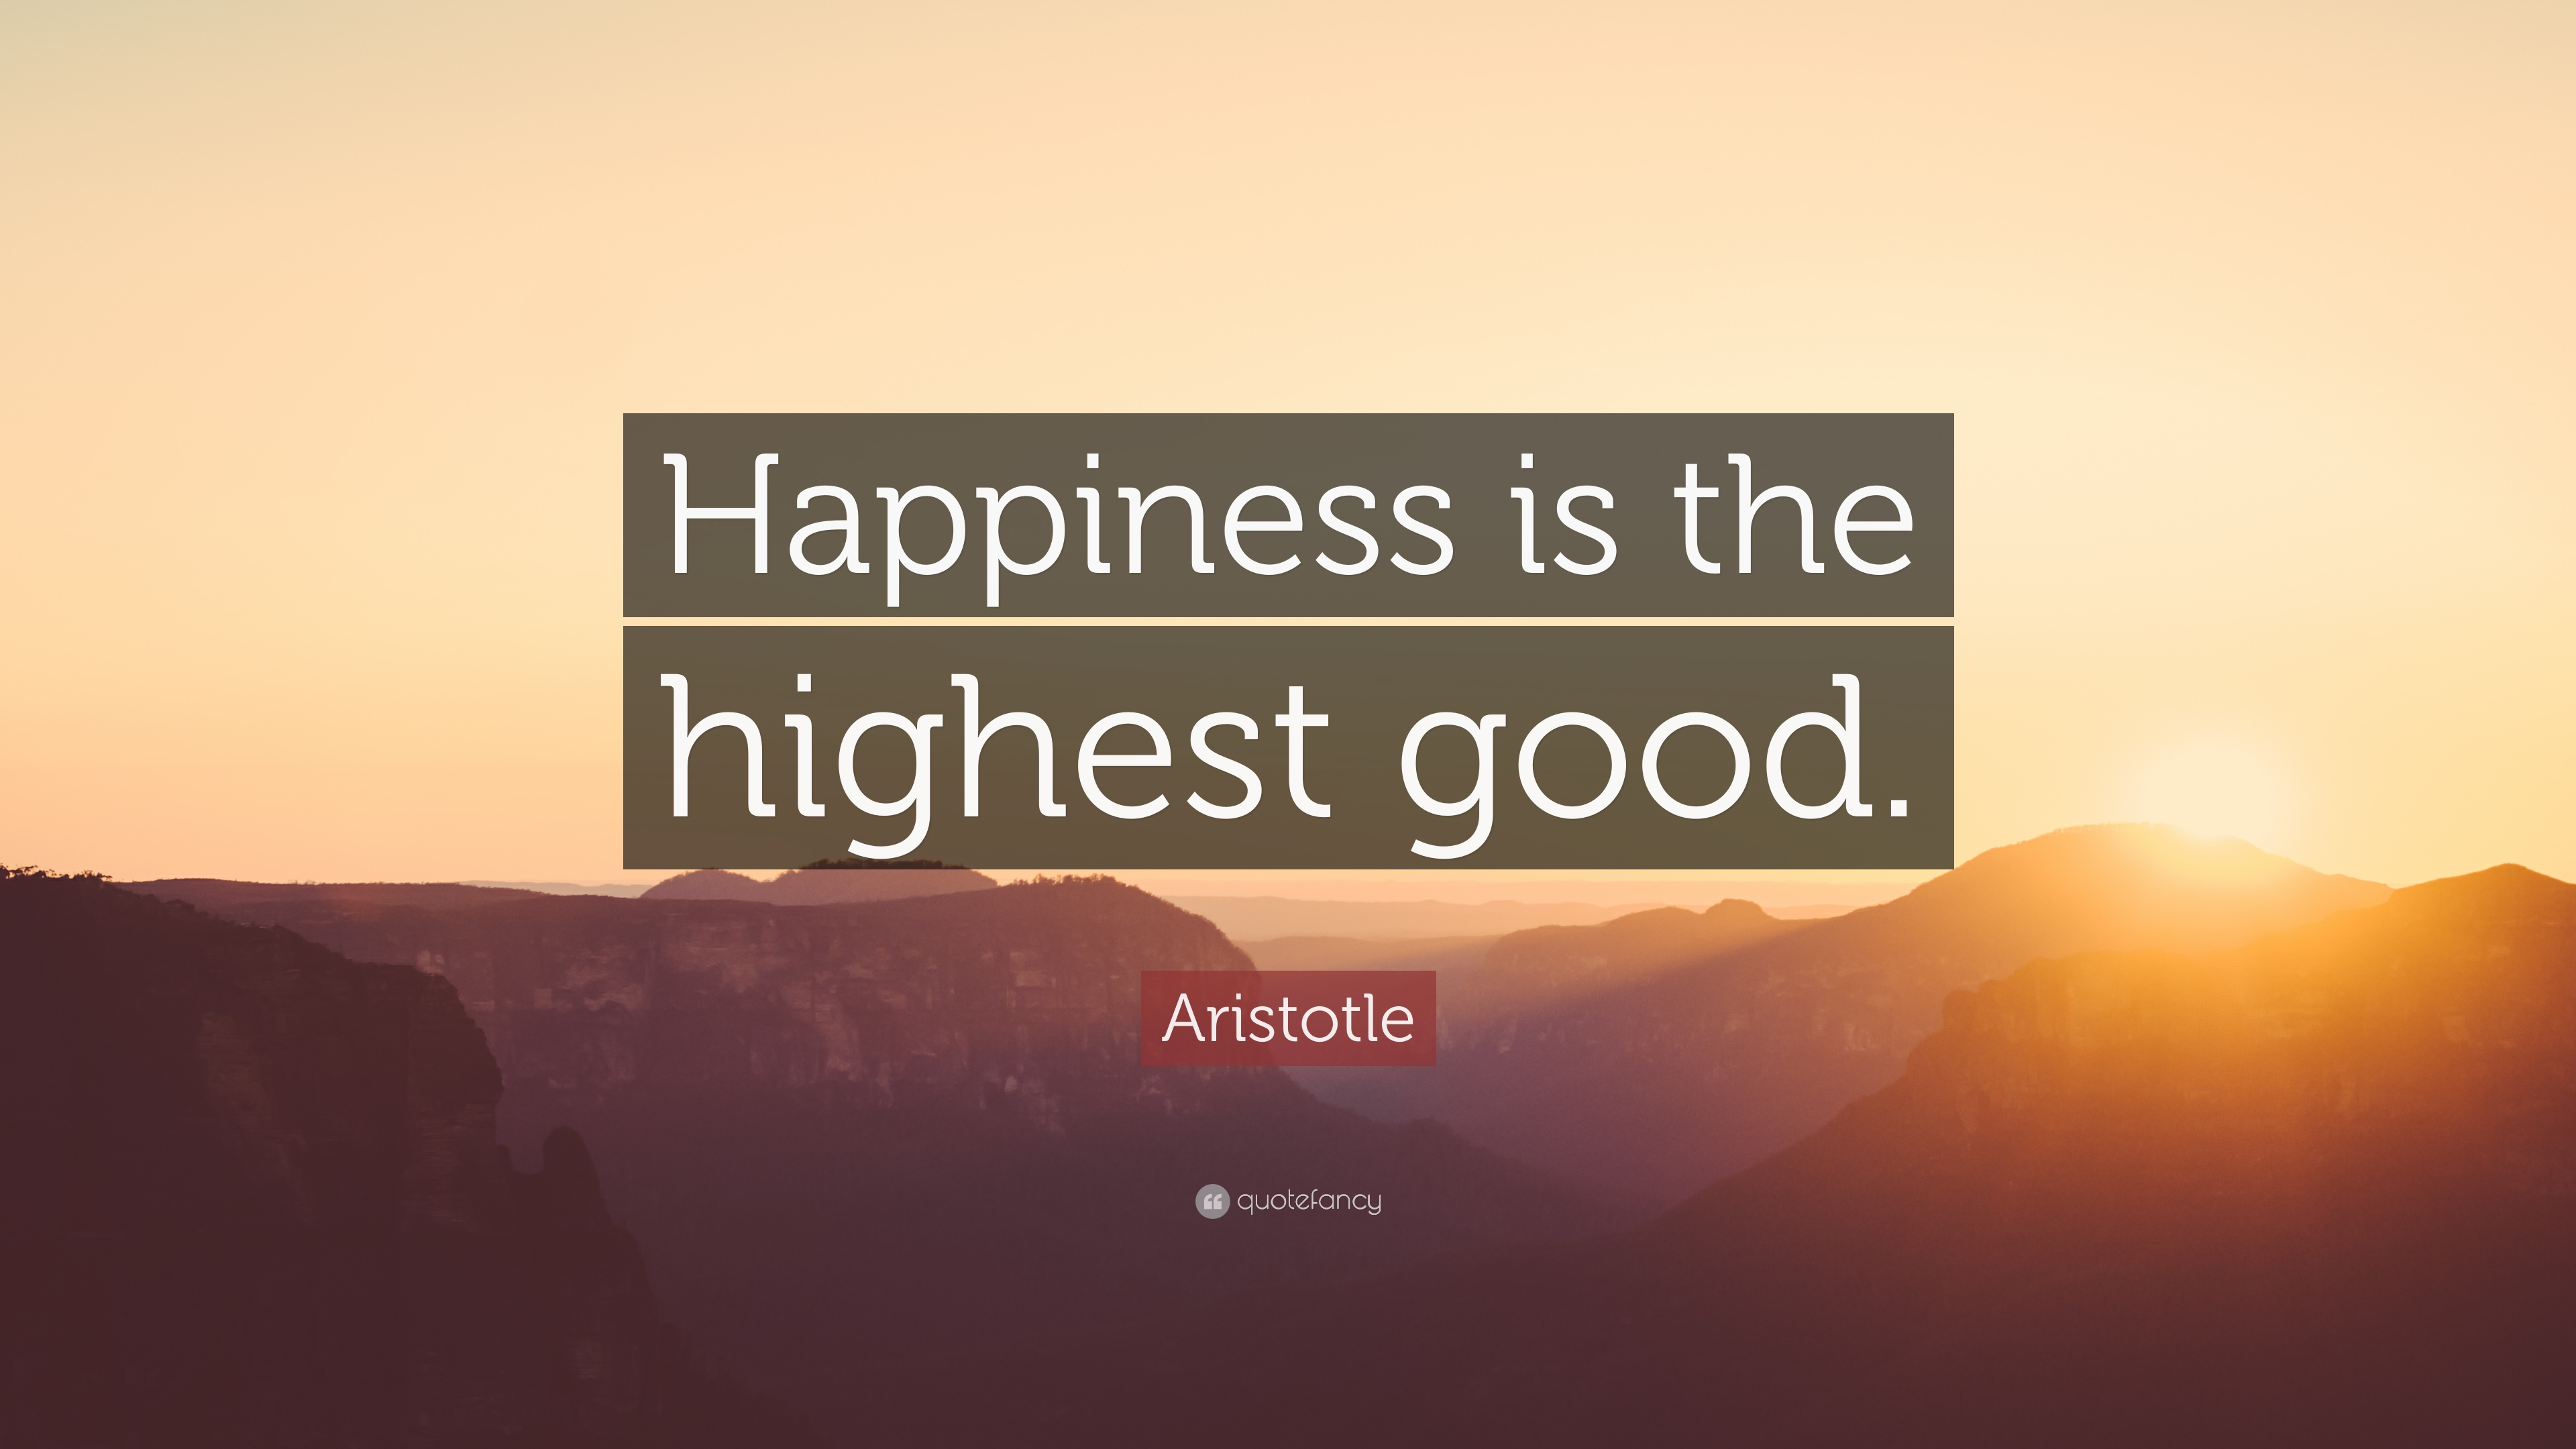 Aristotle Happiness Quote Aristotle Quote “Happiness Is The Highest